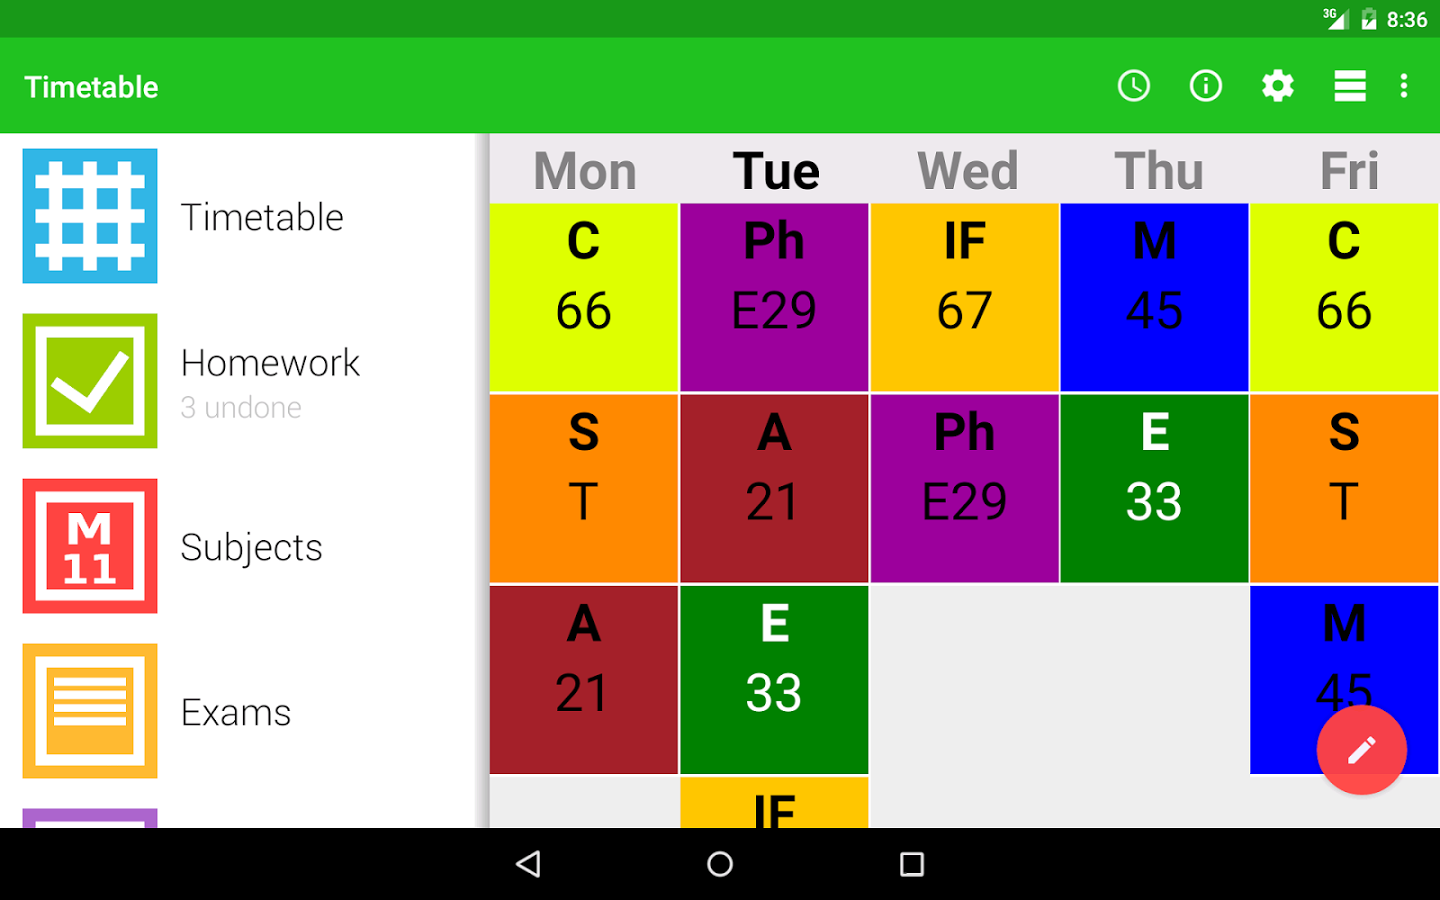 best-timetable-schedule-maker-apps-for-android